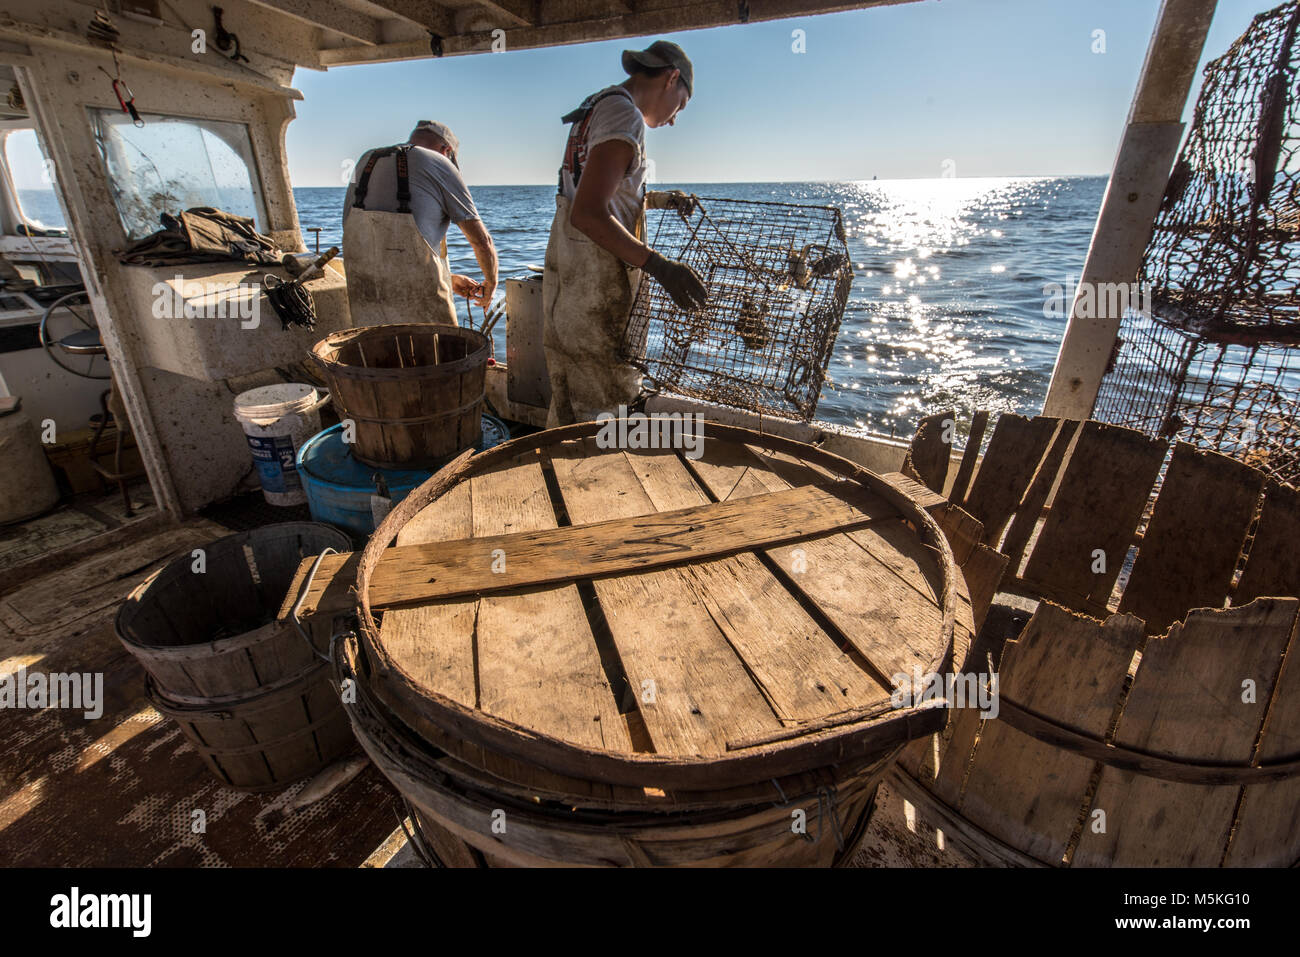 Young and elderly watermen check crab traps together on boat in the Chesapeake Bay, Dundalk, Maryland. Stock Photo